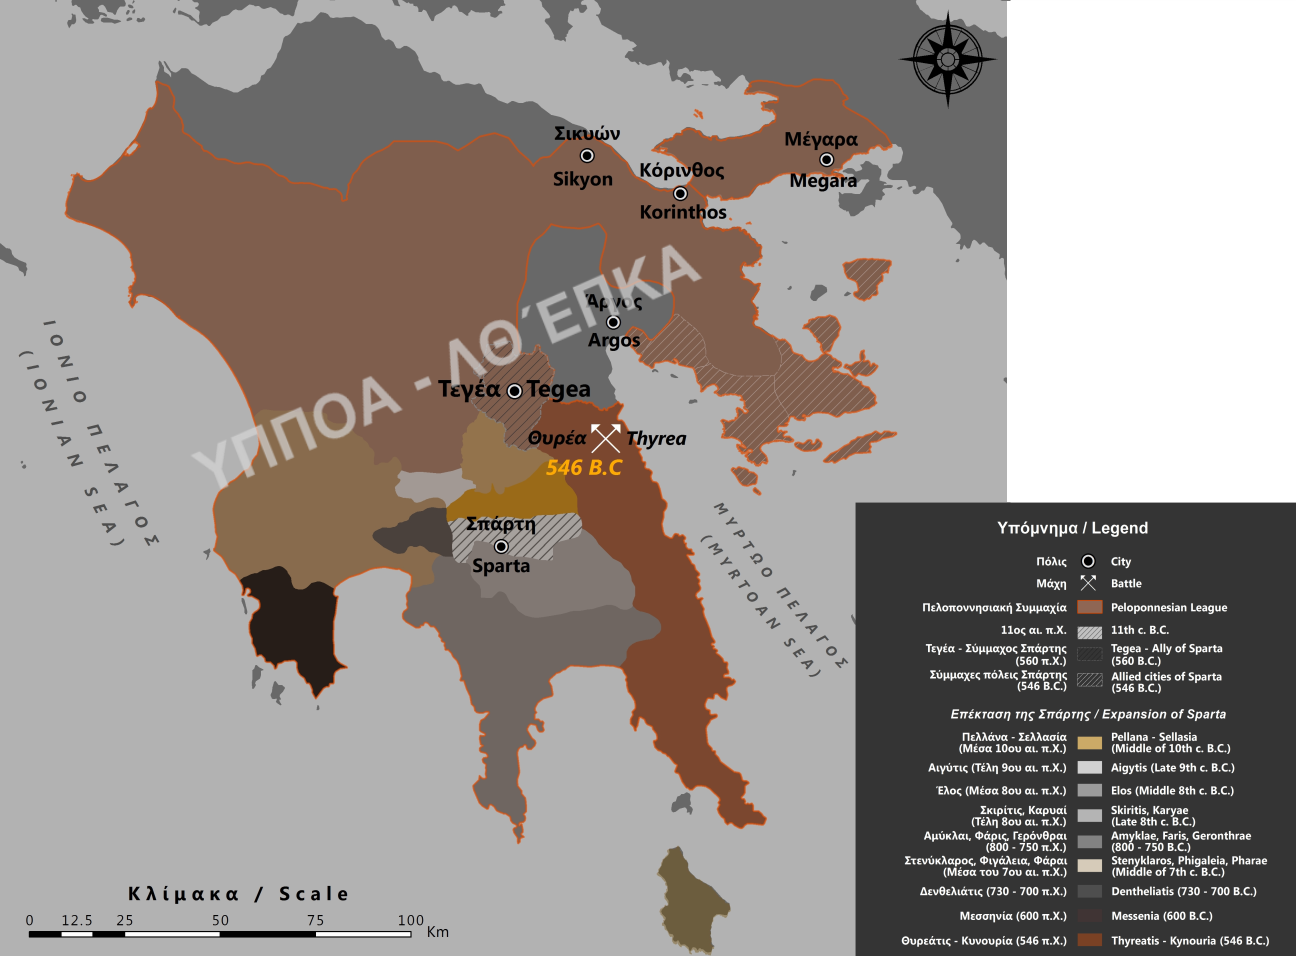 The expansion of Sparta